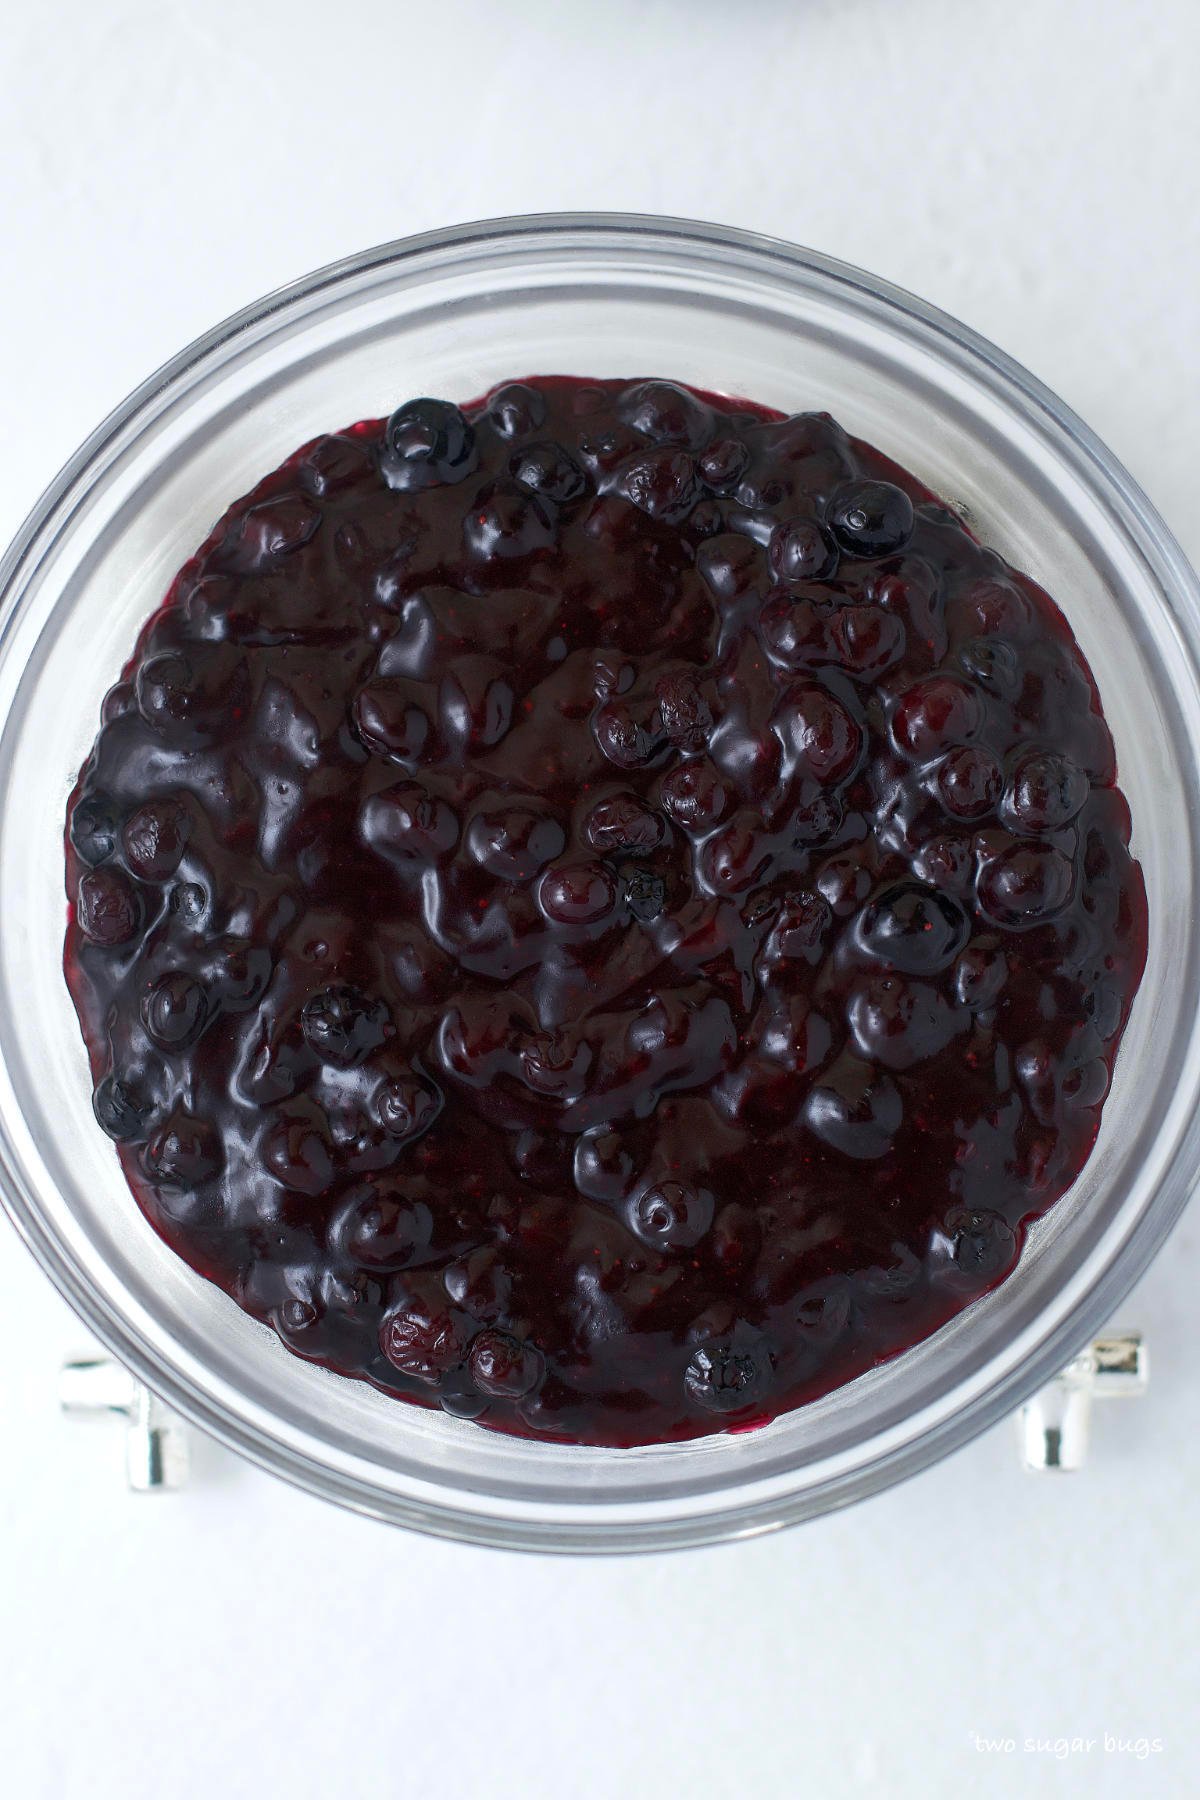 finished blueberry pie filling in a glass bowl